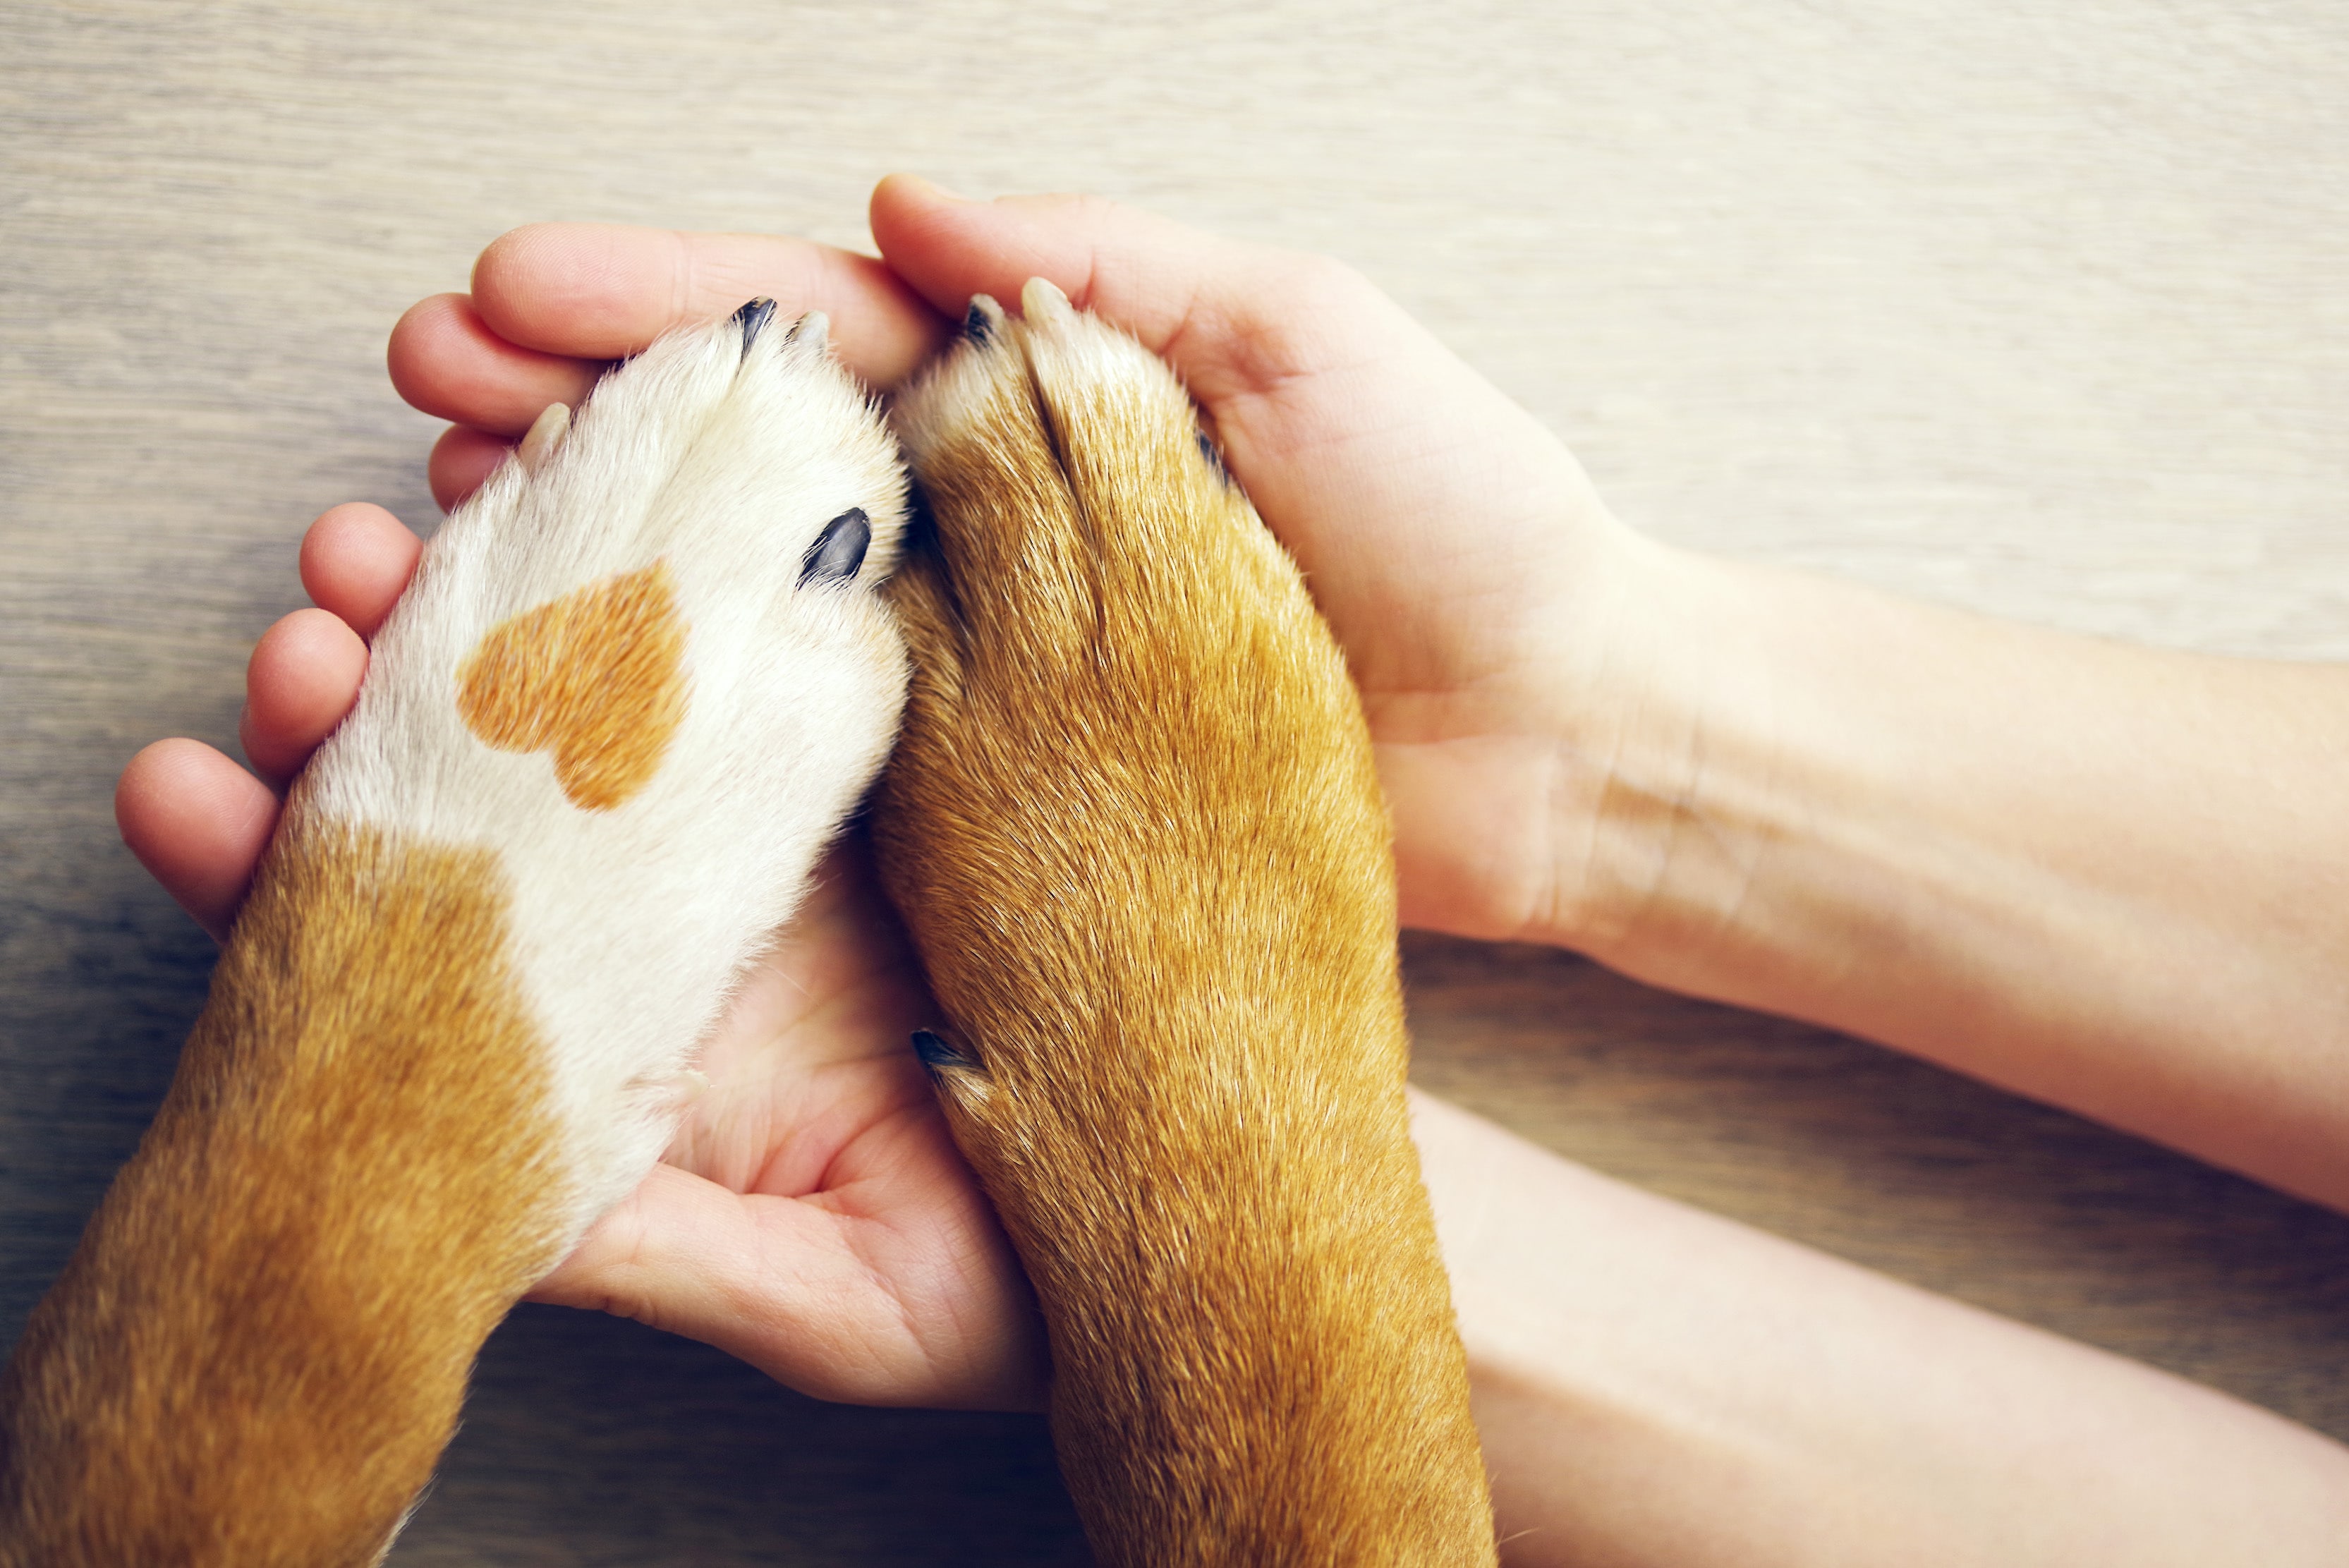 A dog's paws placed gently on it's owner's hands in a gesture of connection